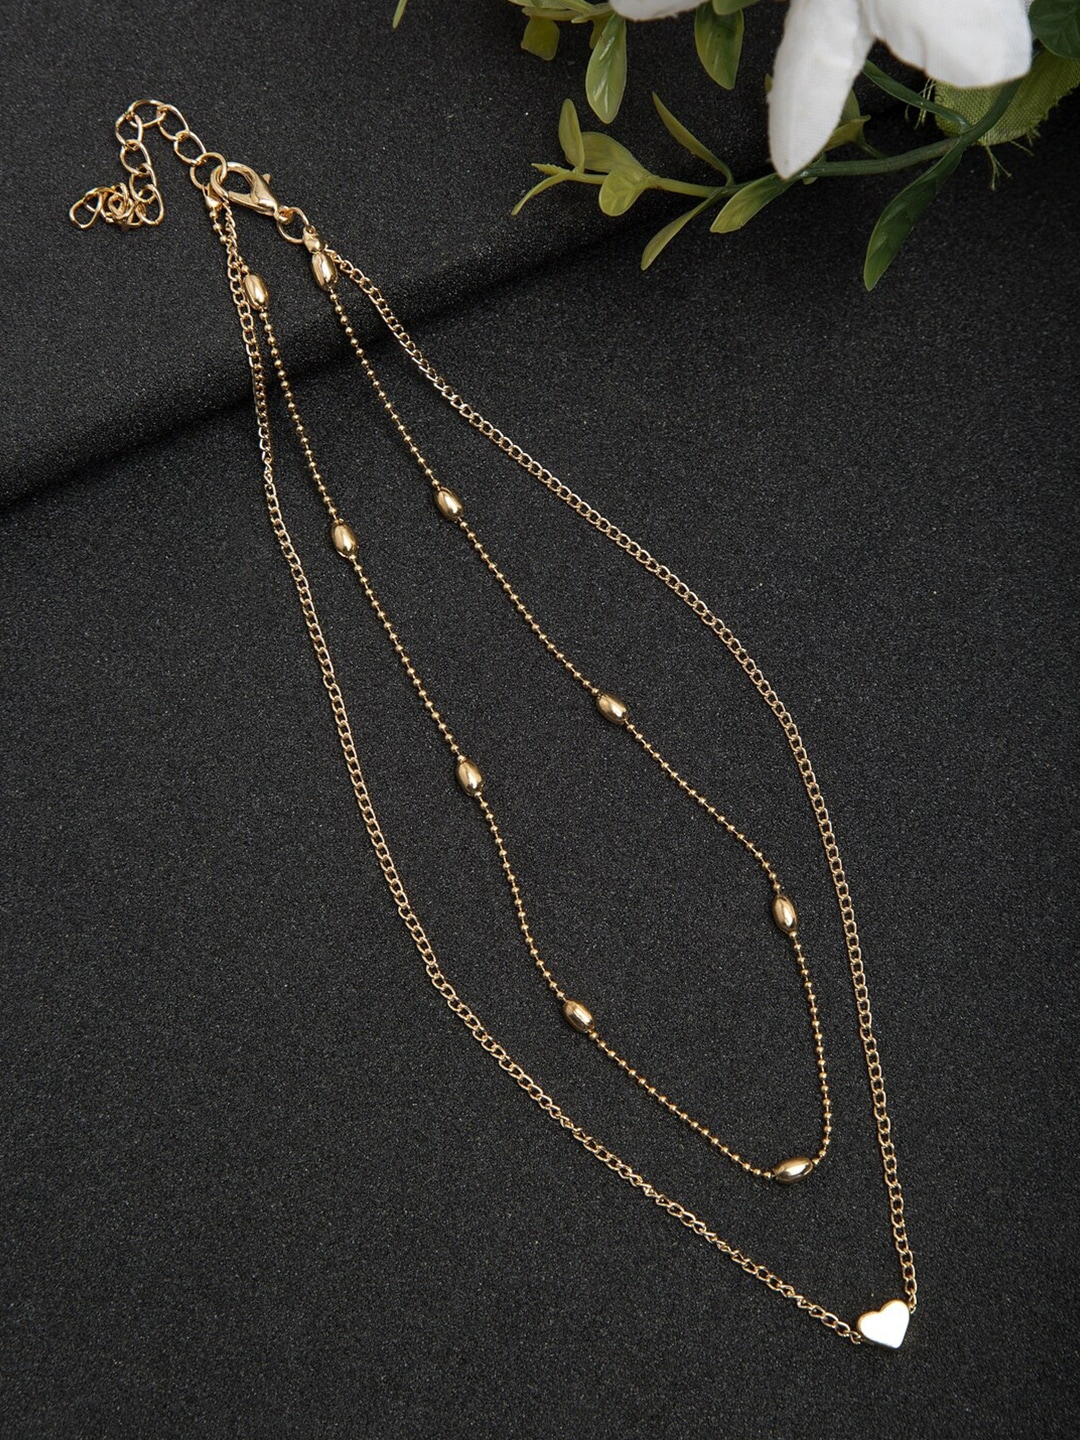 YouBella Gold-Toned Gold-Plated Layered Necklace Price in India